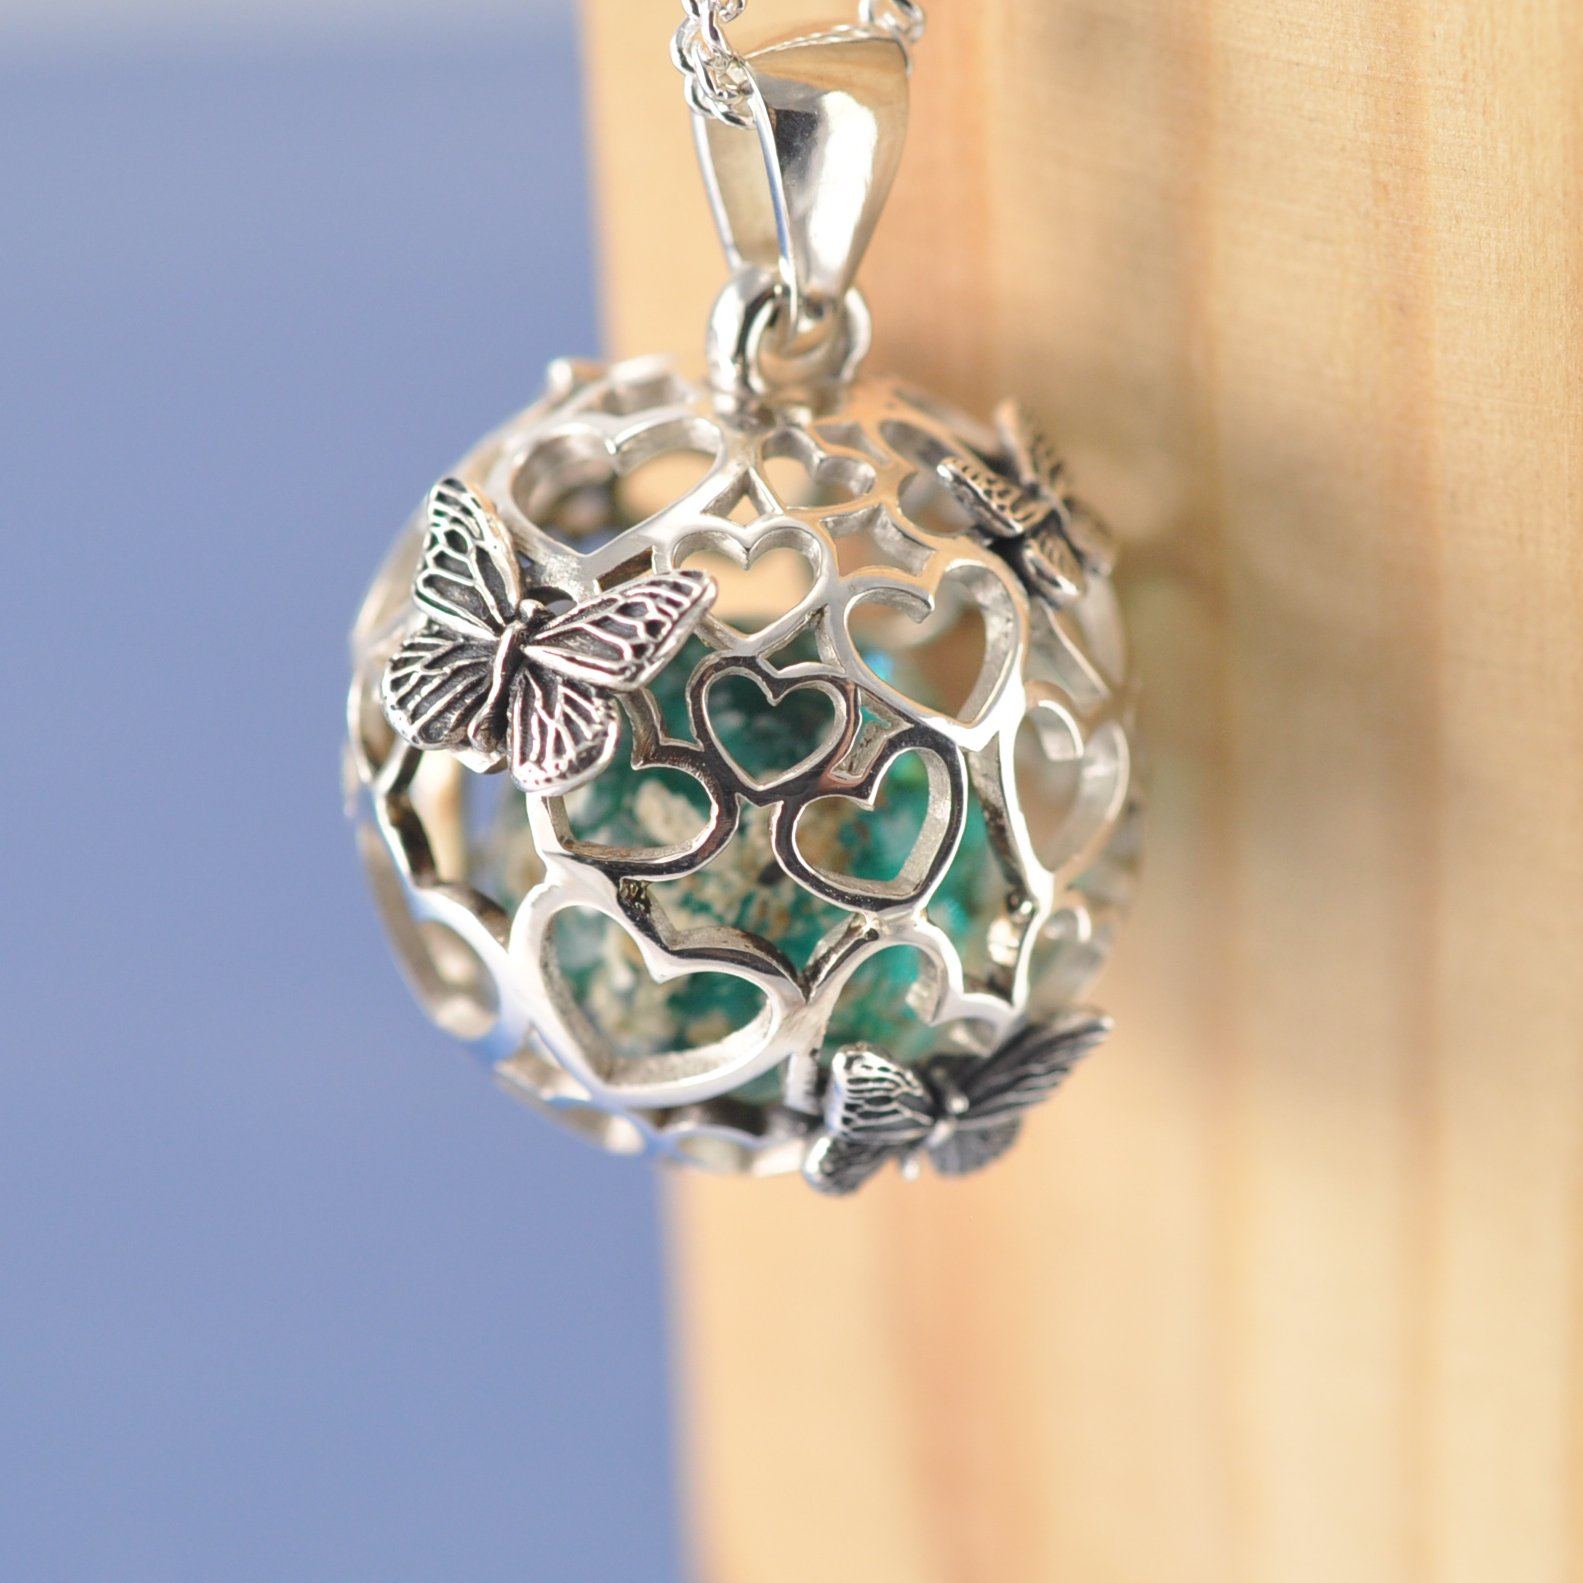 Butterfly Heart Sphere Cremation Ash Marble Necklace Pendant by Chris Parry Jewellery